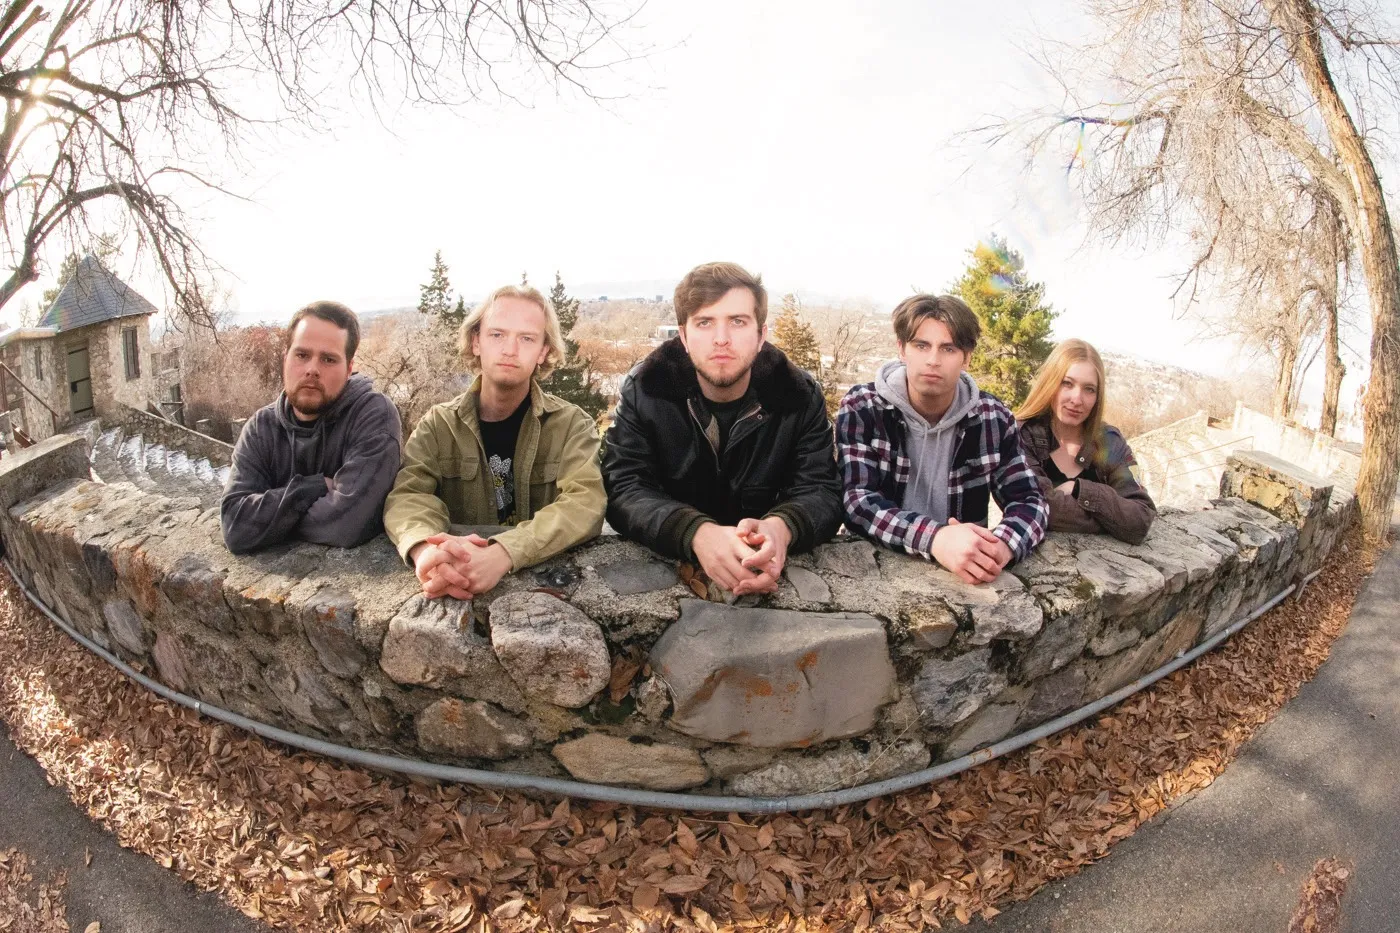 The members of No Such Animal lean on a cobblestone wall through a fisheye lens.